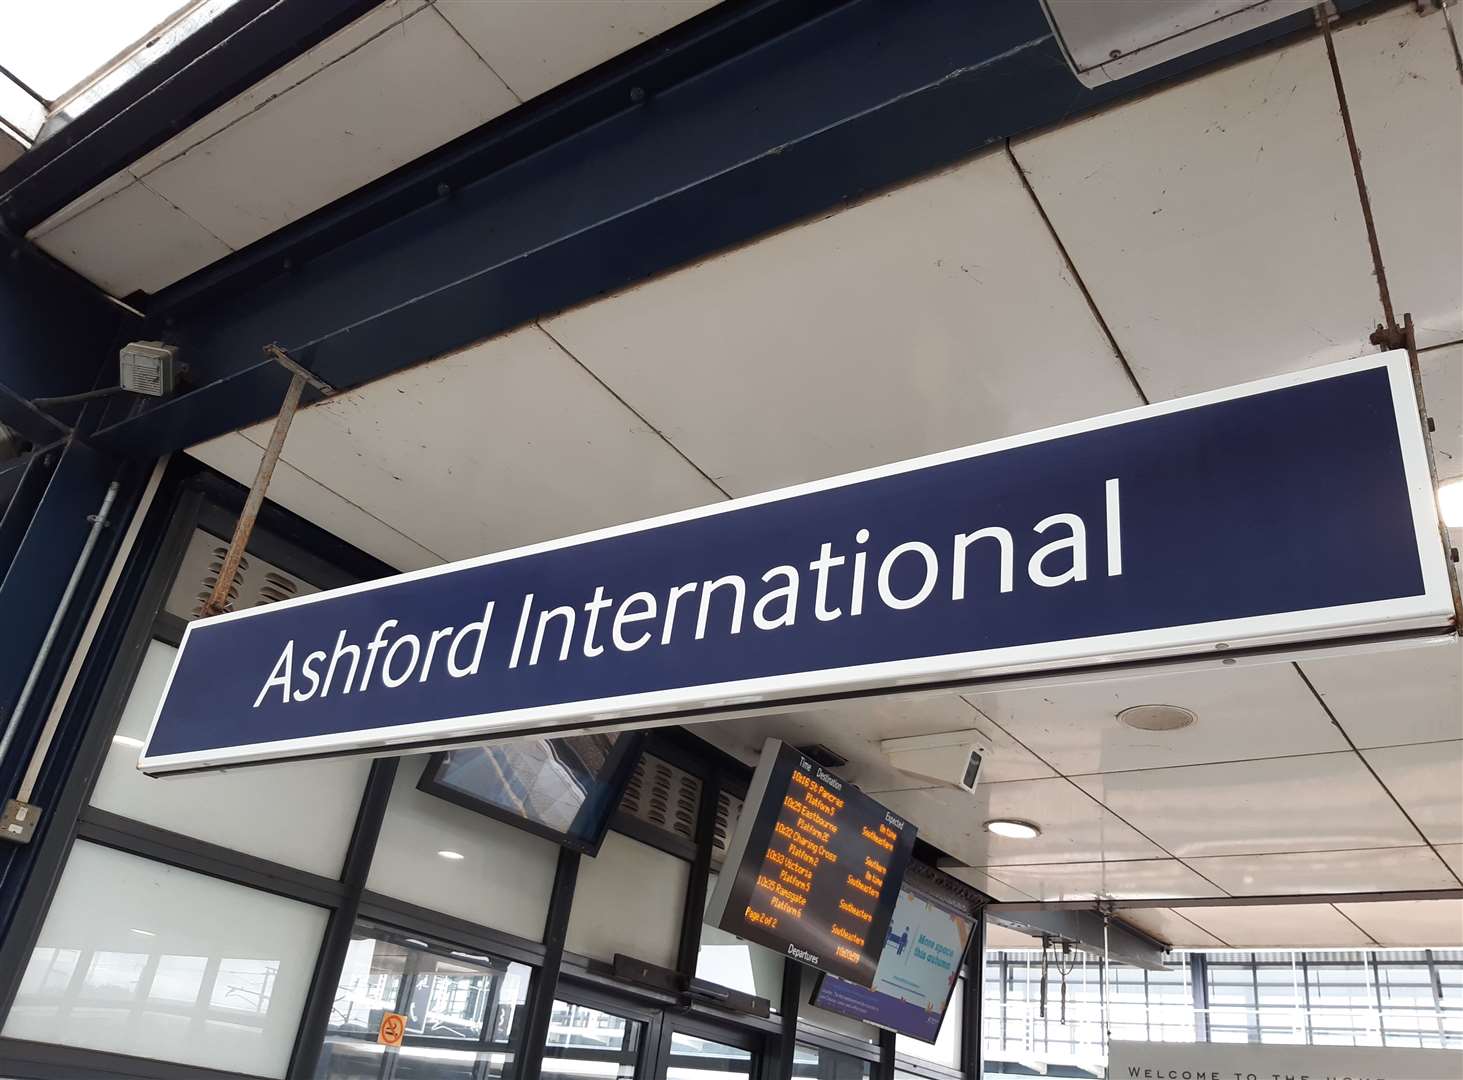 Trains to and from Ashford International station are being delayed